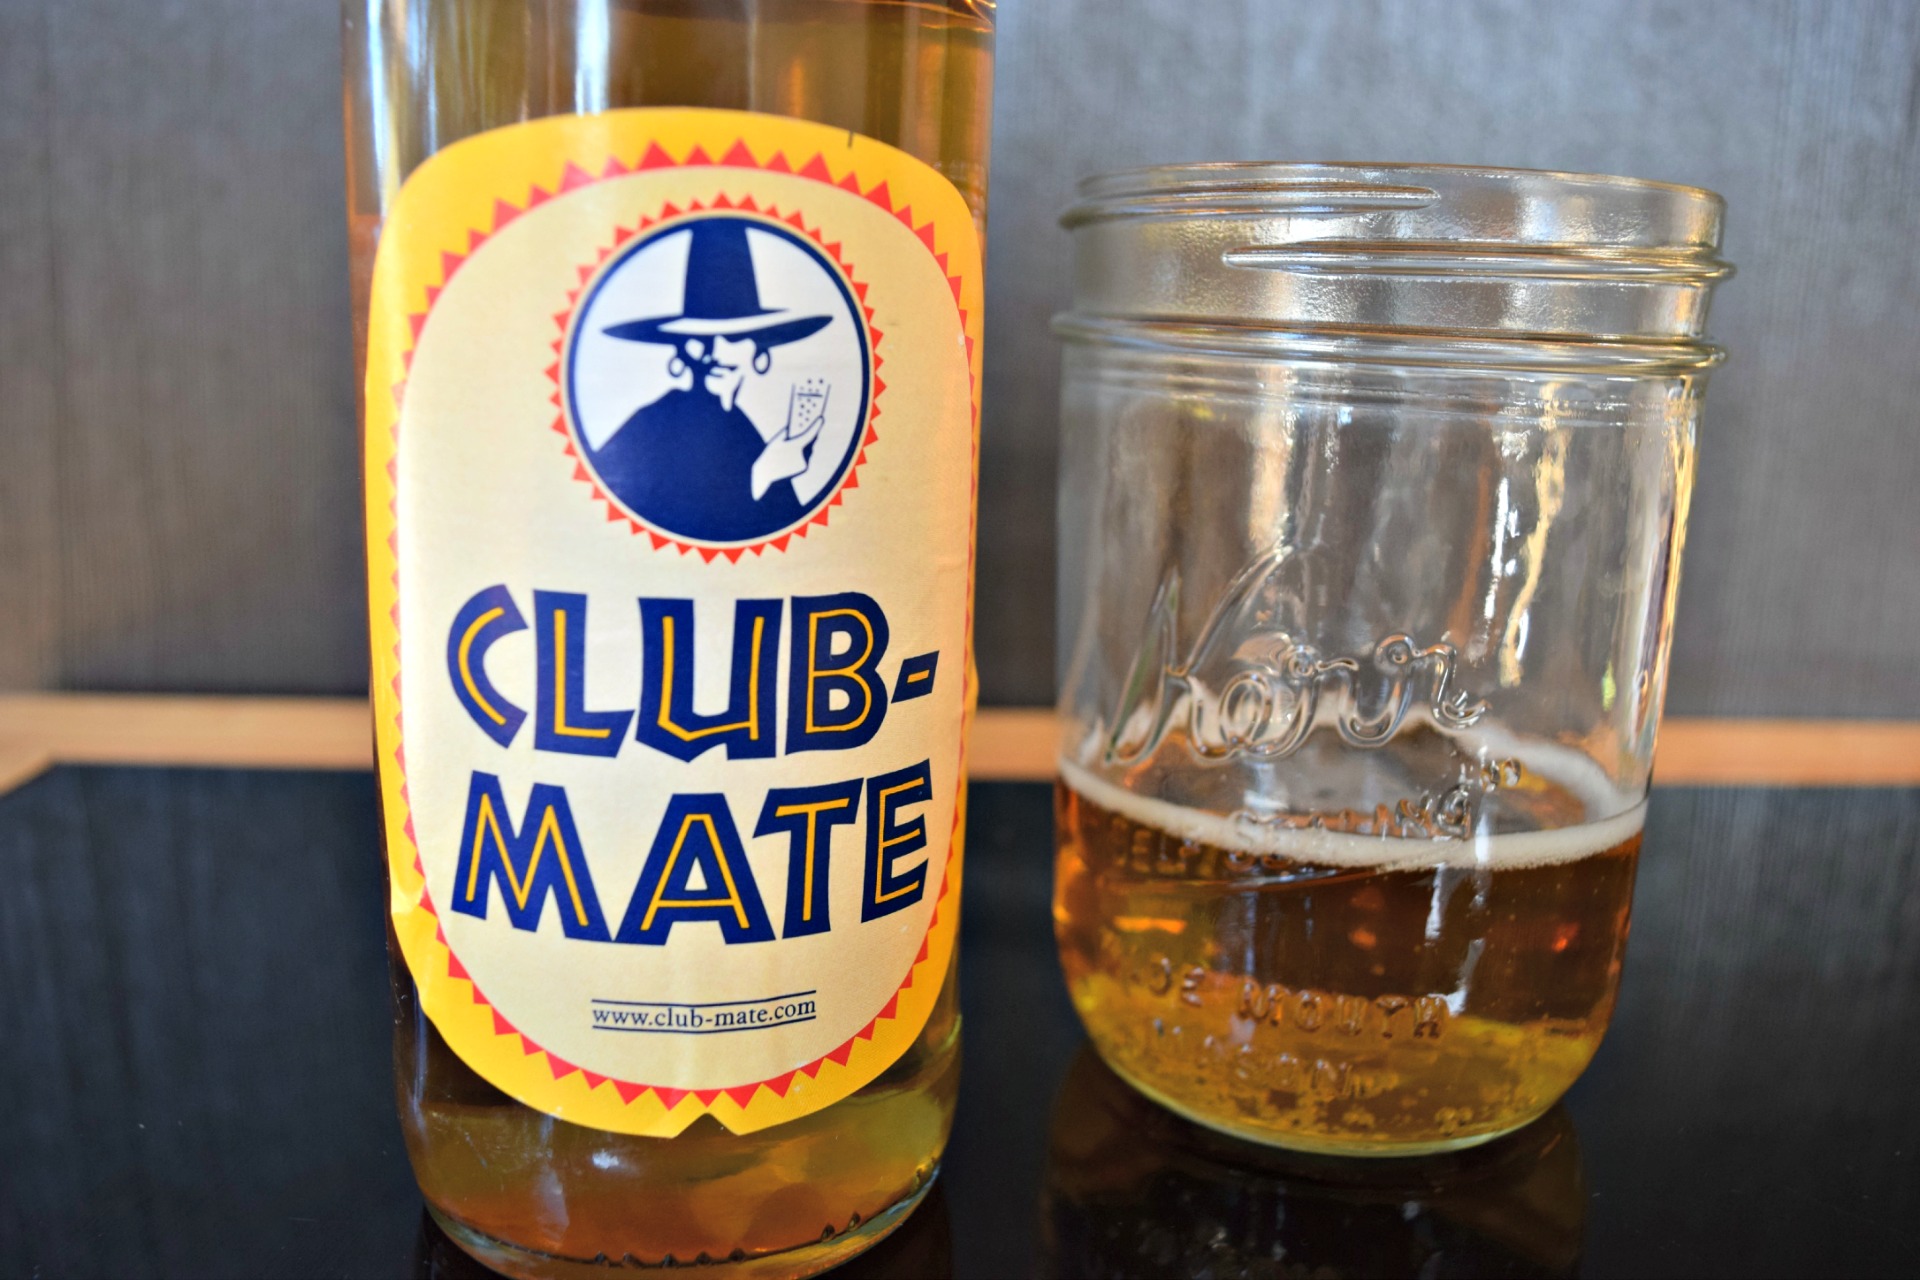 Kindercentrum houding regio Your New Favorite Energy Drink: An Exclusive Club (Mate) Comes To SF | KQED